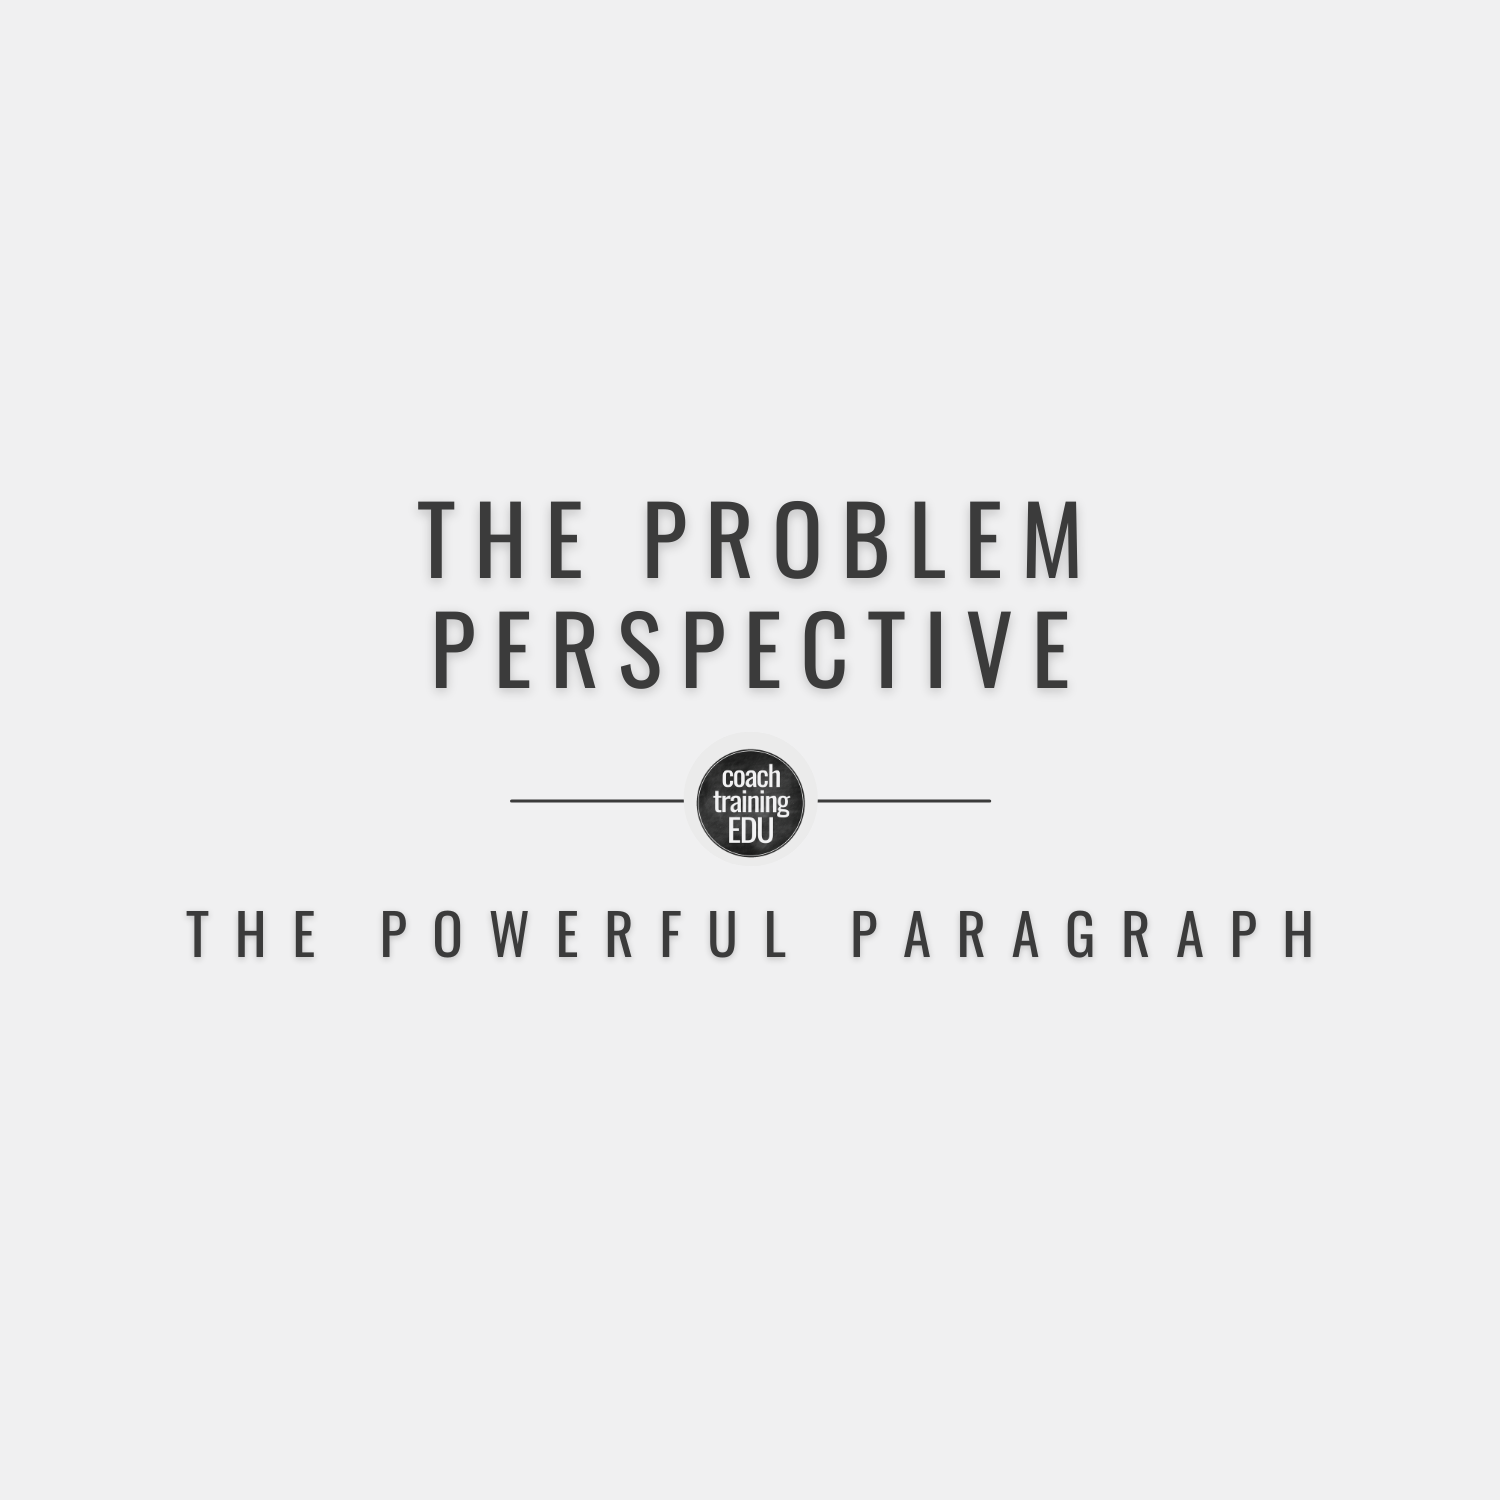 The Problem Perspective